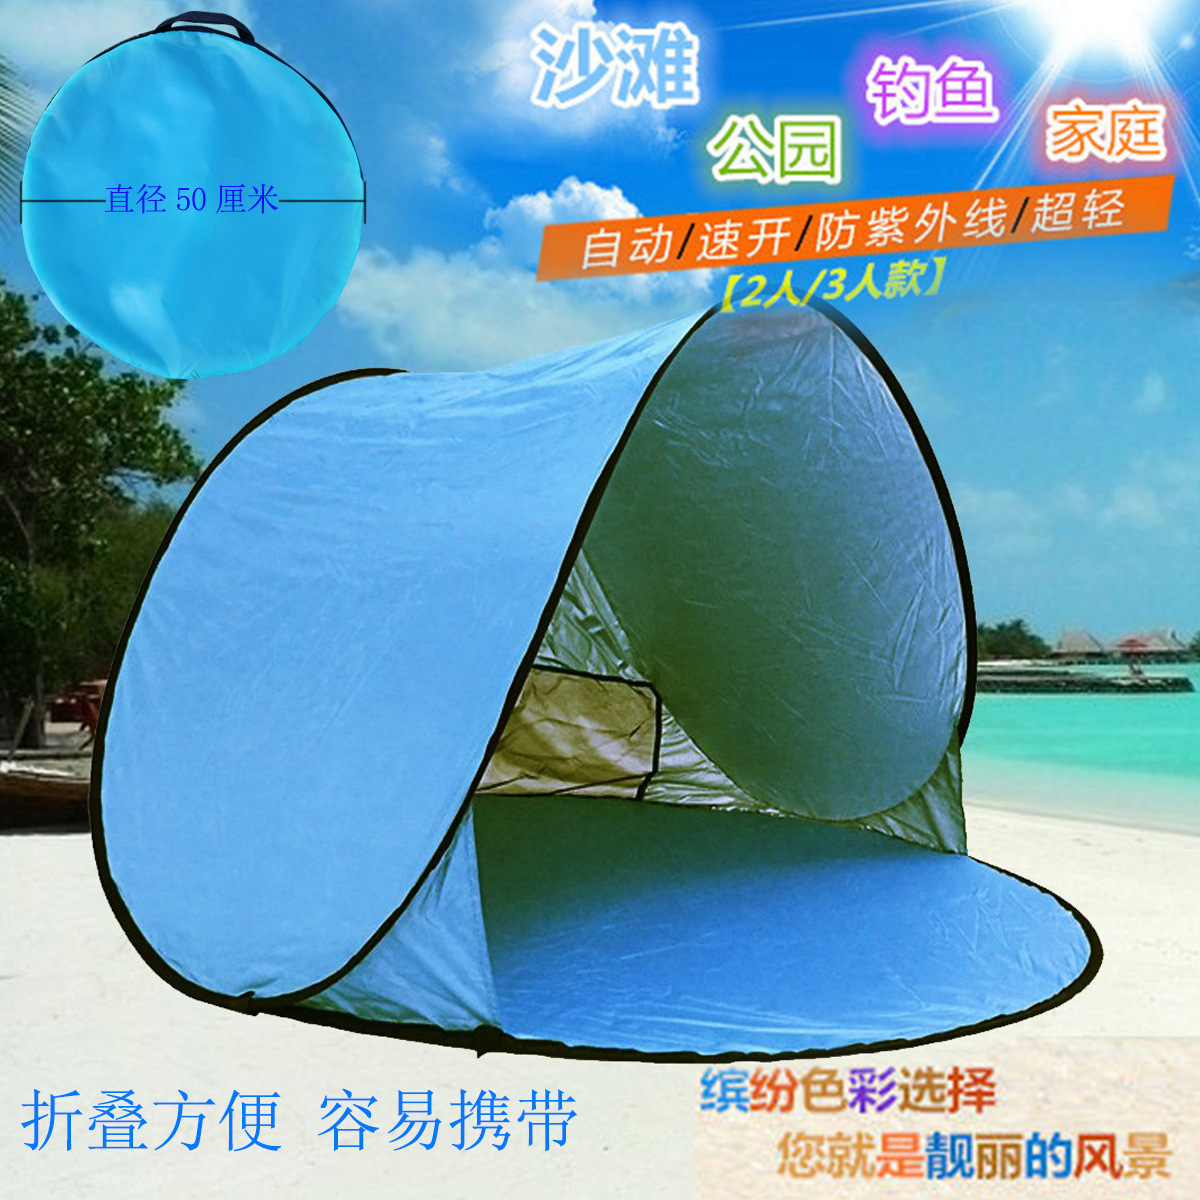 beach tent automatic folding building-free outdoor single double fishing shed sunshade tent outing travel camping